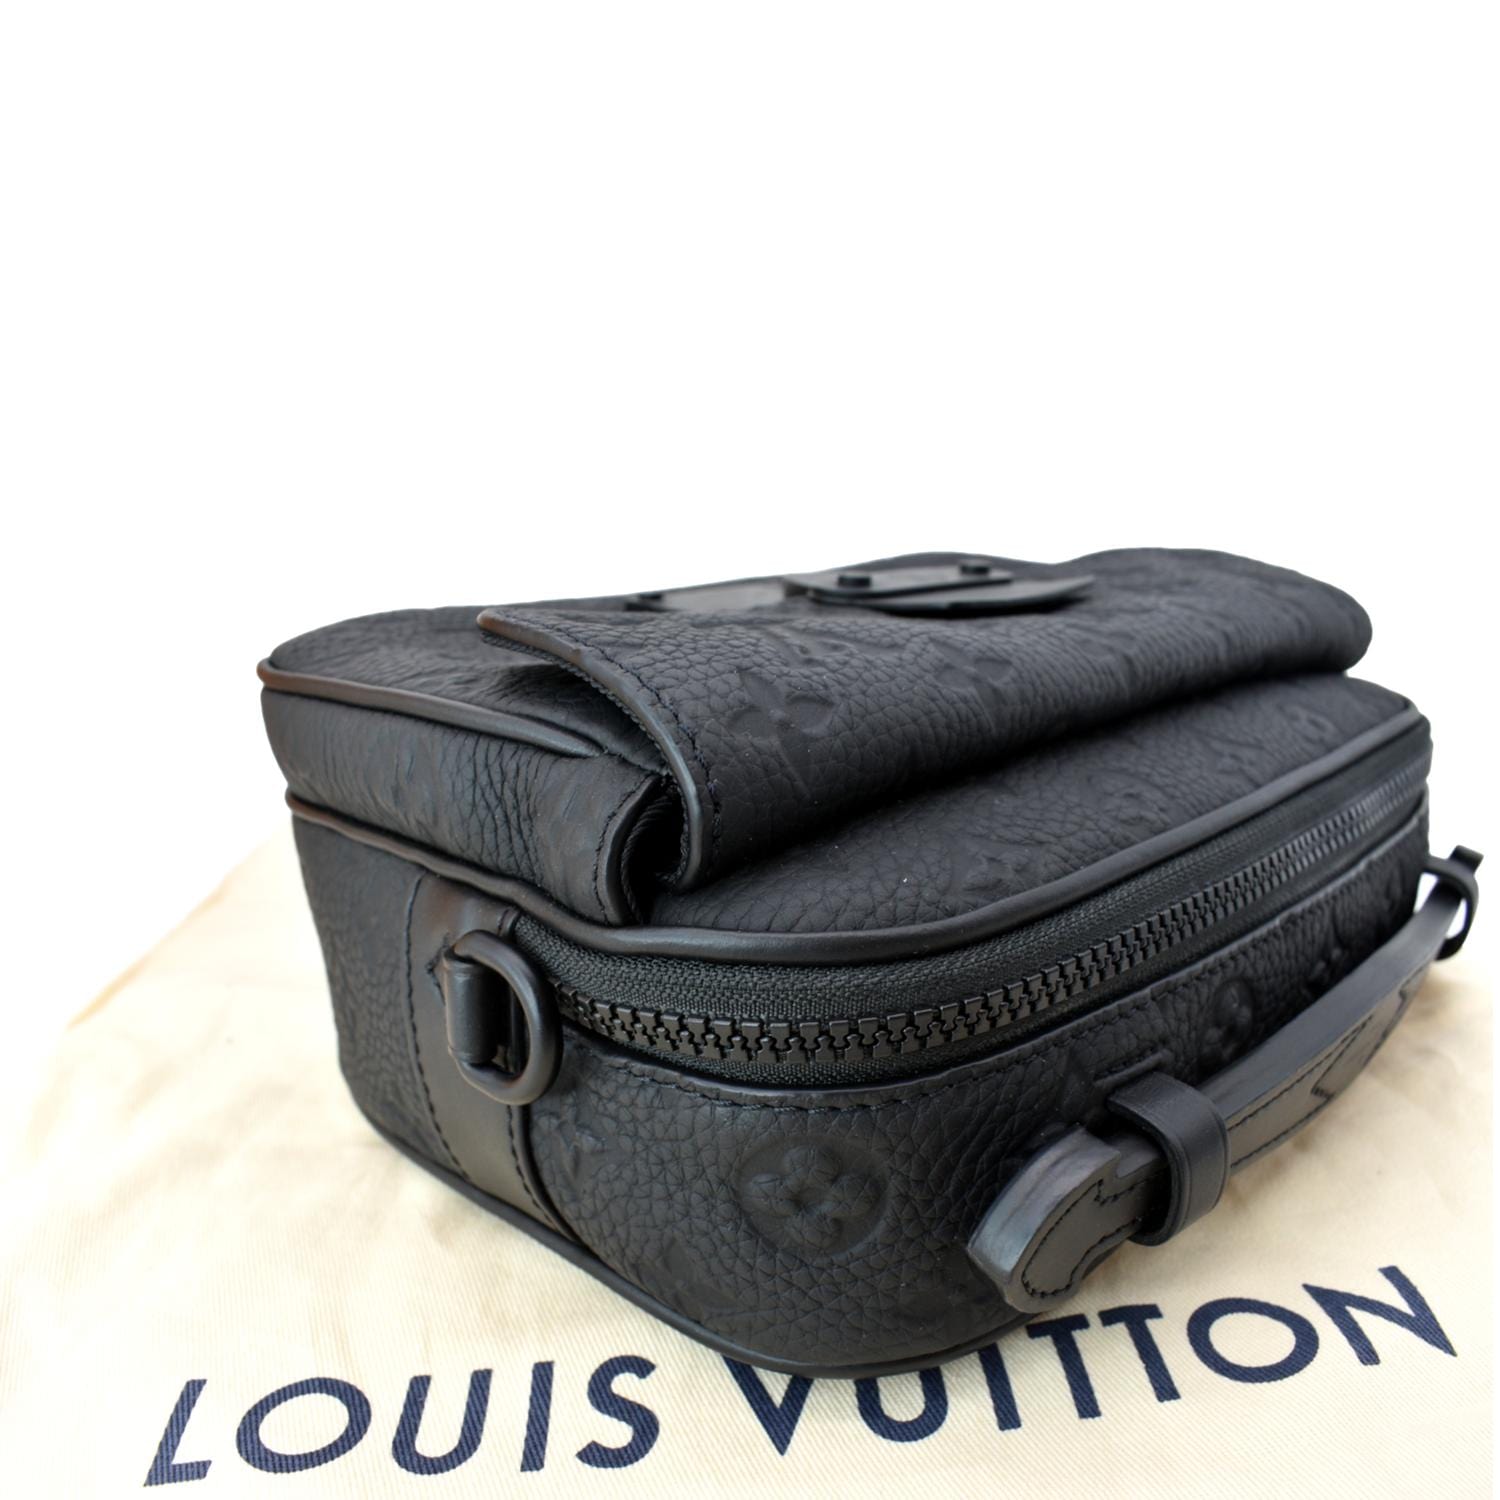 Félicie leather crossbody bag Louis Vuitton Black in Leather - 27407038